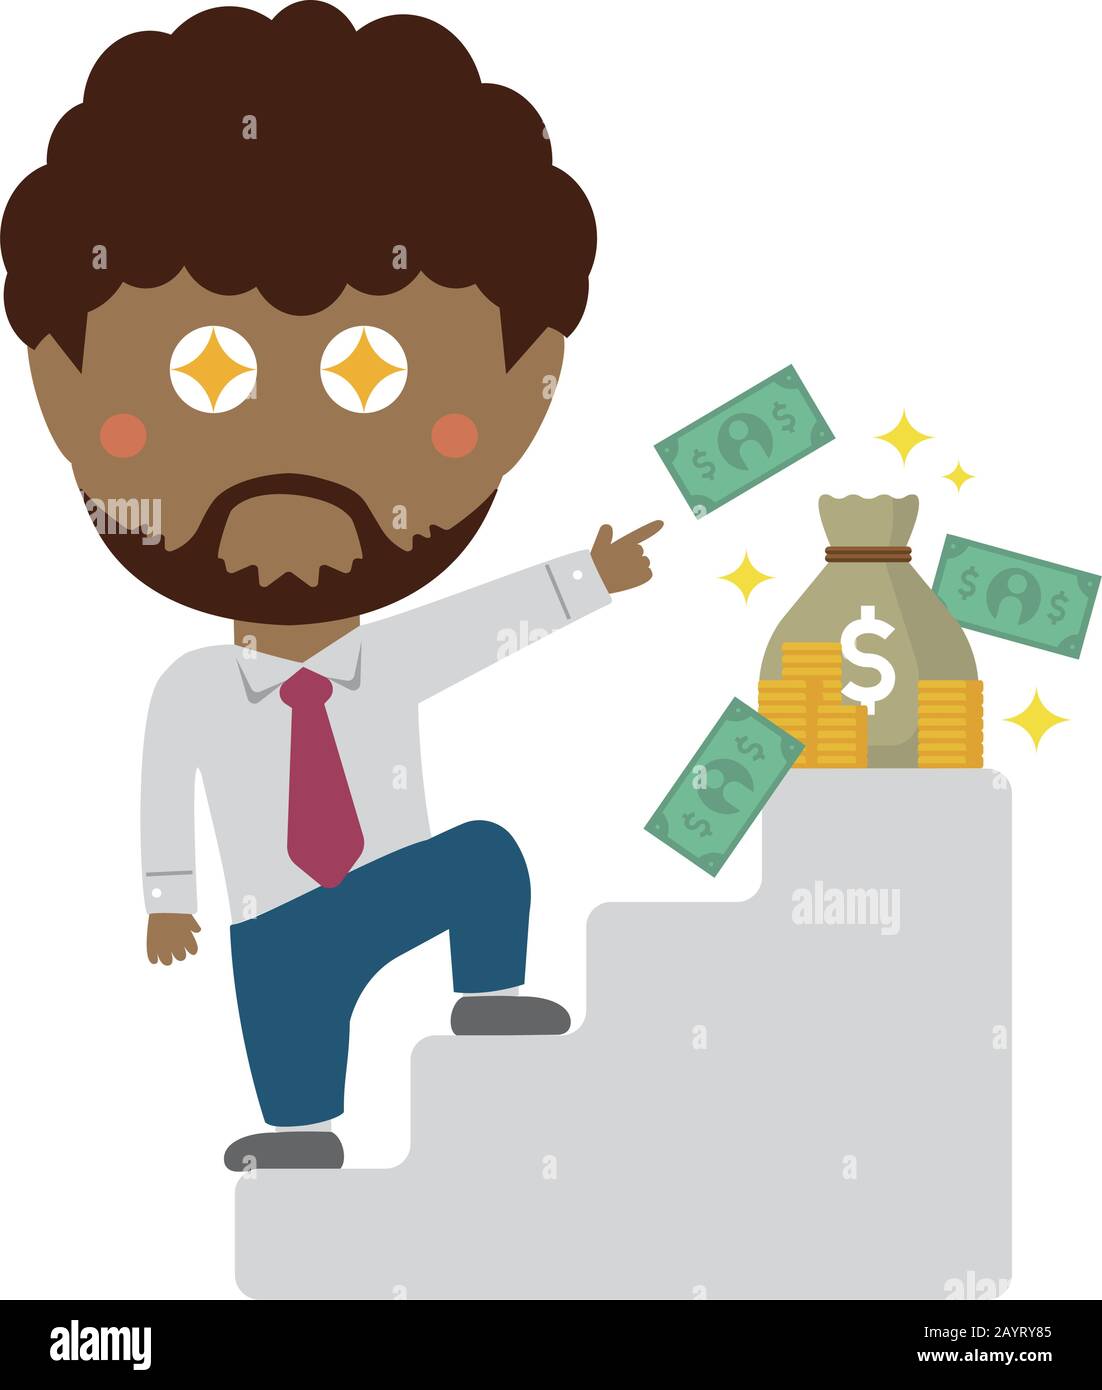 deformed cartoon businessman illustration of going up the stairs aiming to get money ( black businessman) Stock Vector